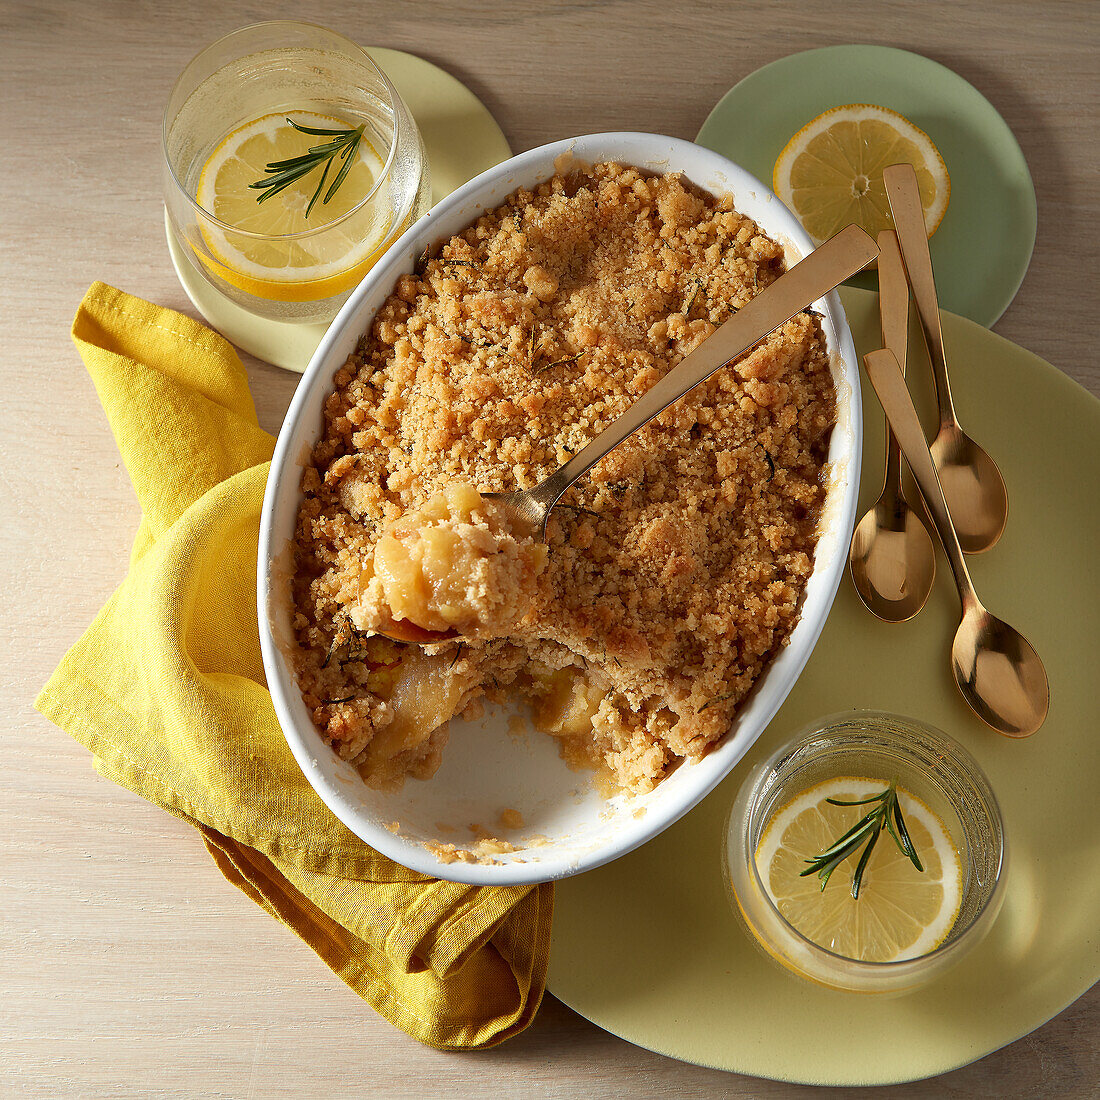 Apple and rosemary crumble